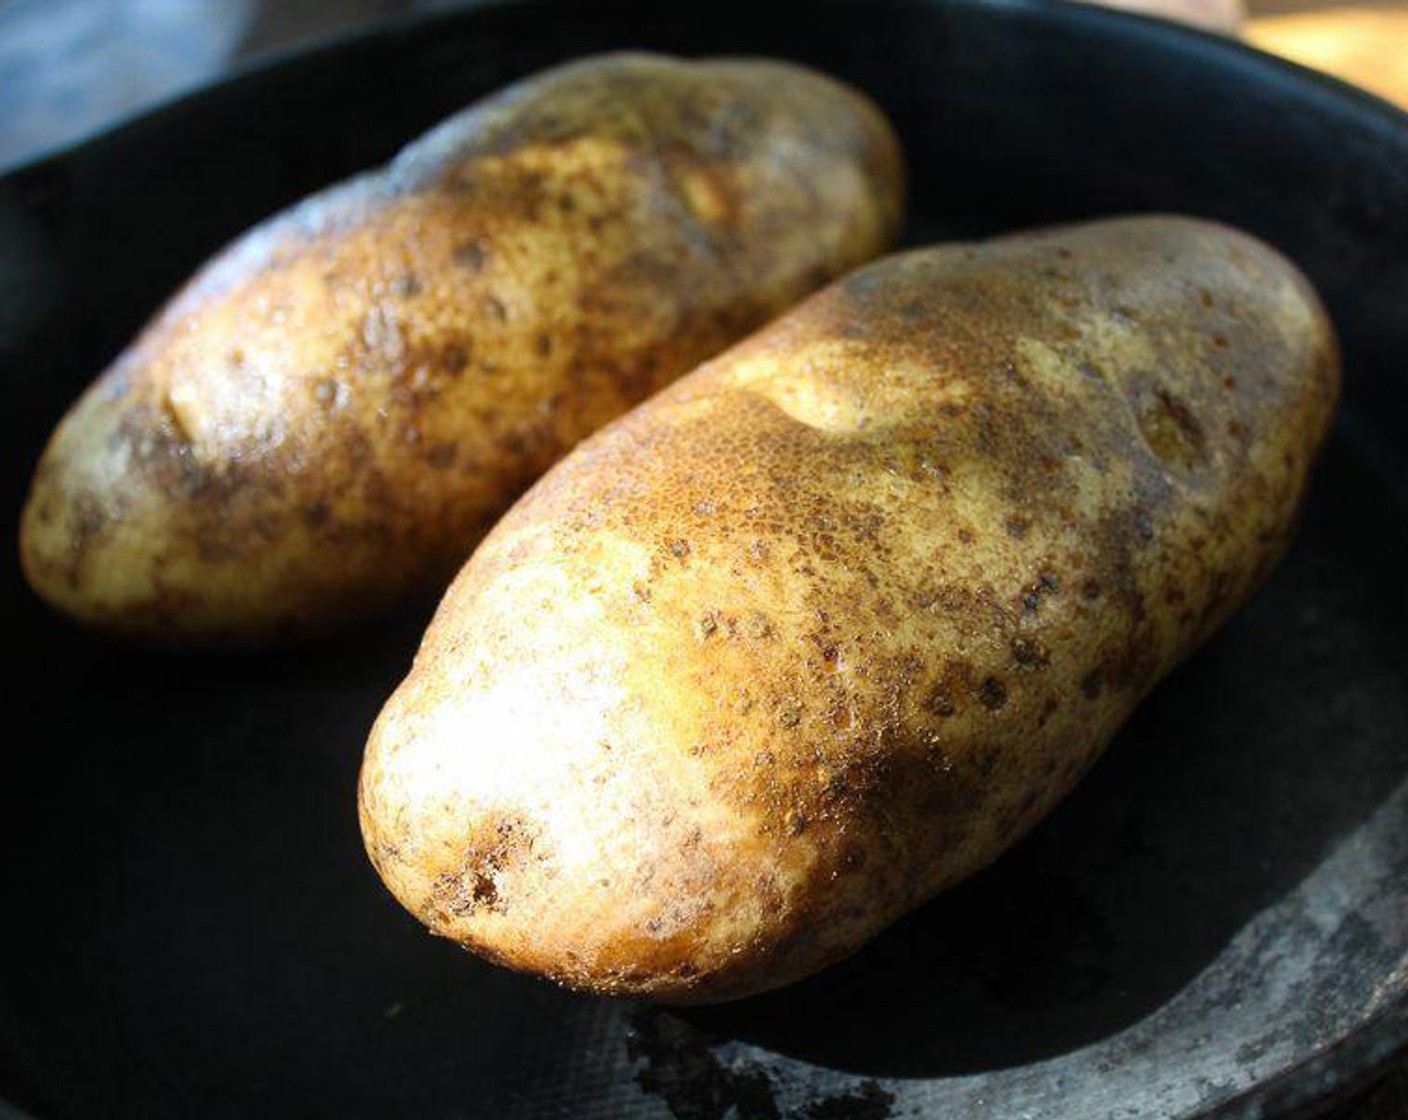 step 2 Wash and scrub the Potatoes (2), then prick all over several times with a fork. Rub each potato with Vegetable Oil (1/2 Tbsp).